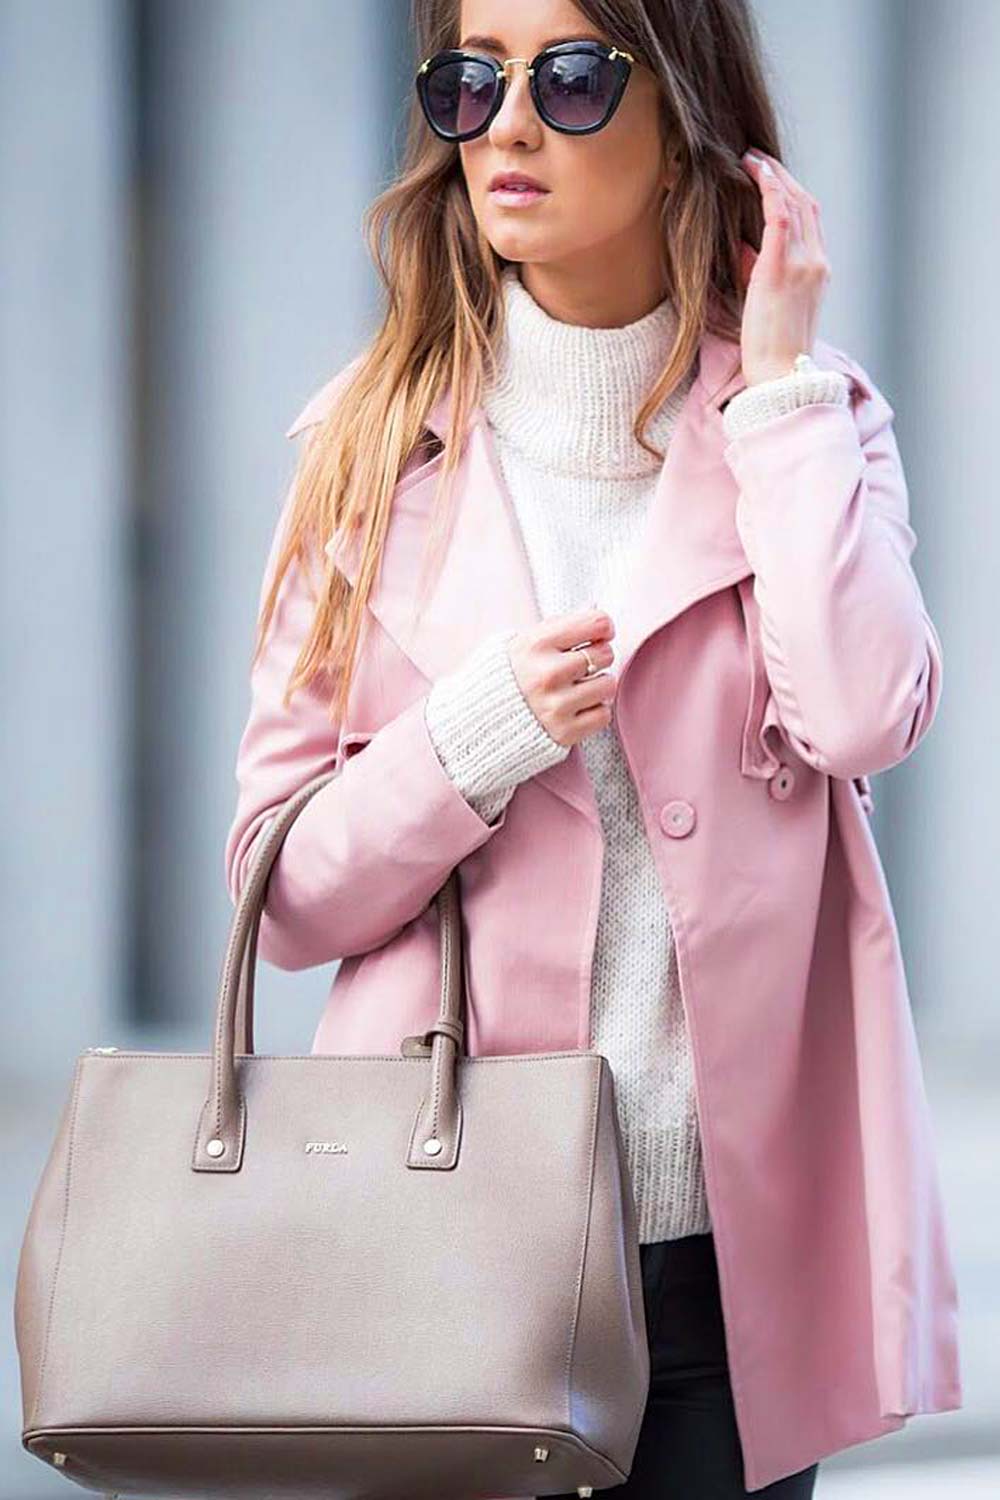 Pink Coats For Casual Girly Look